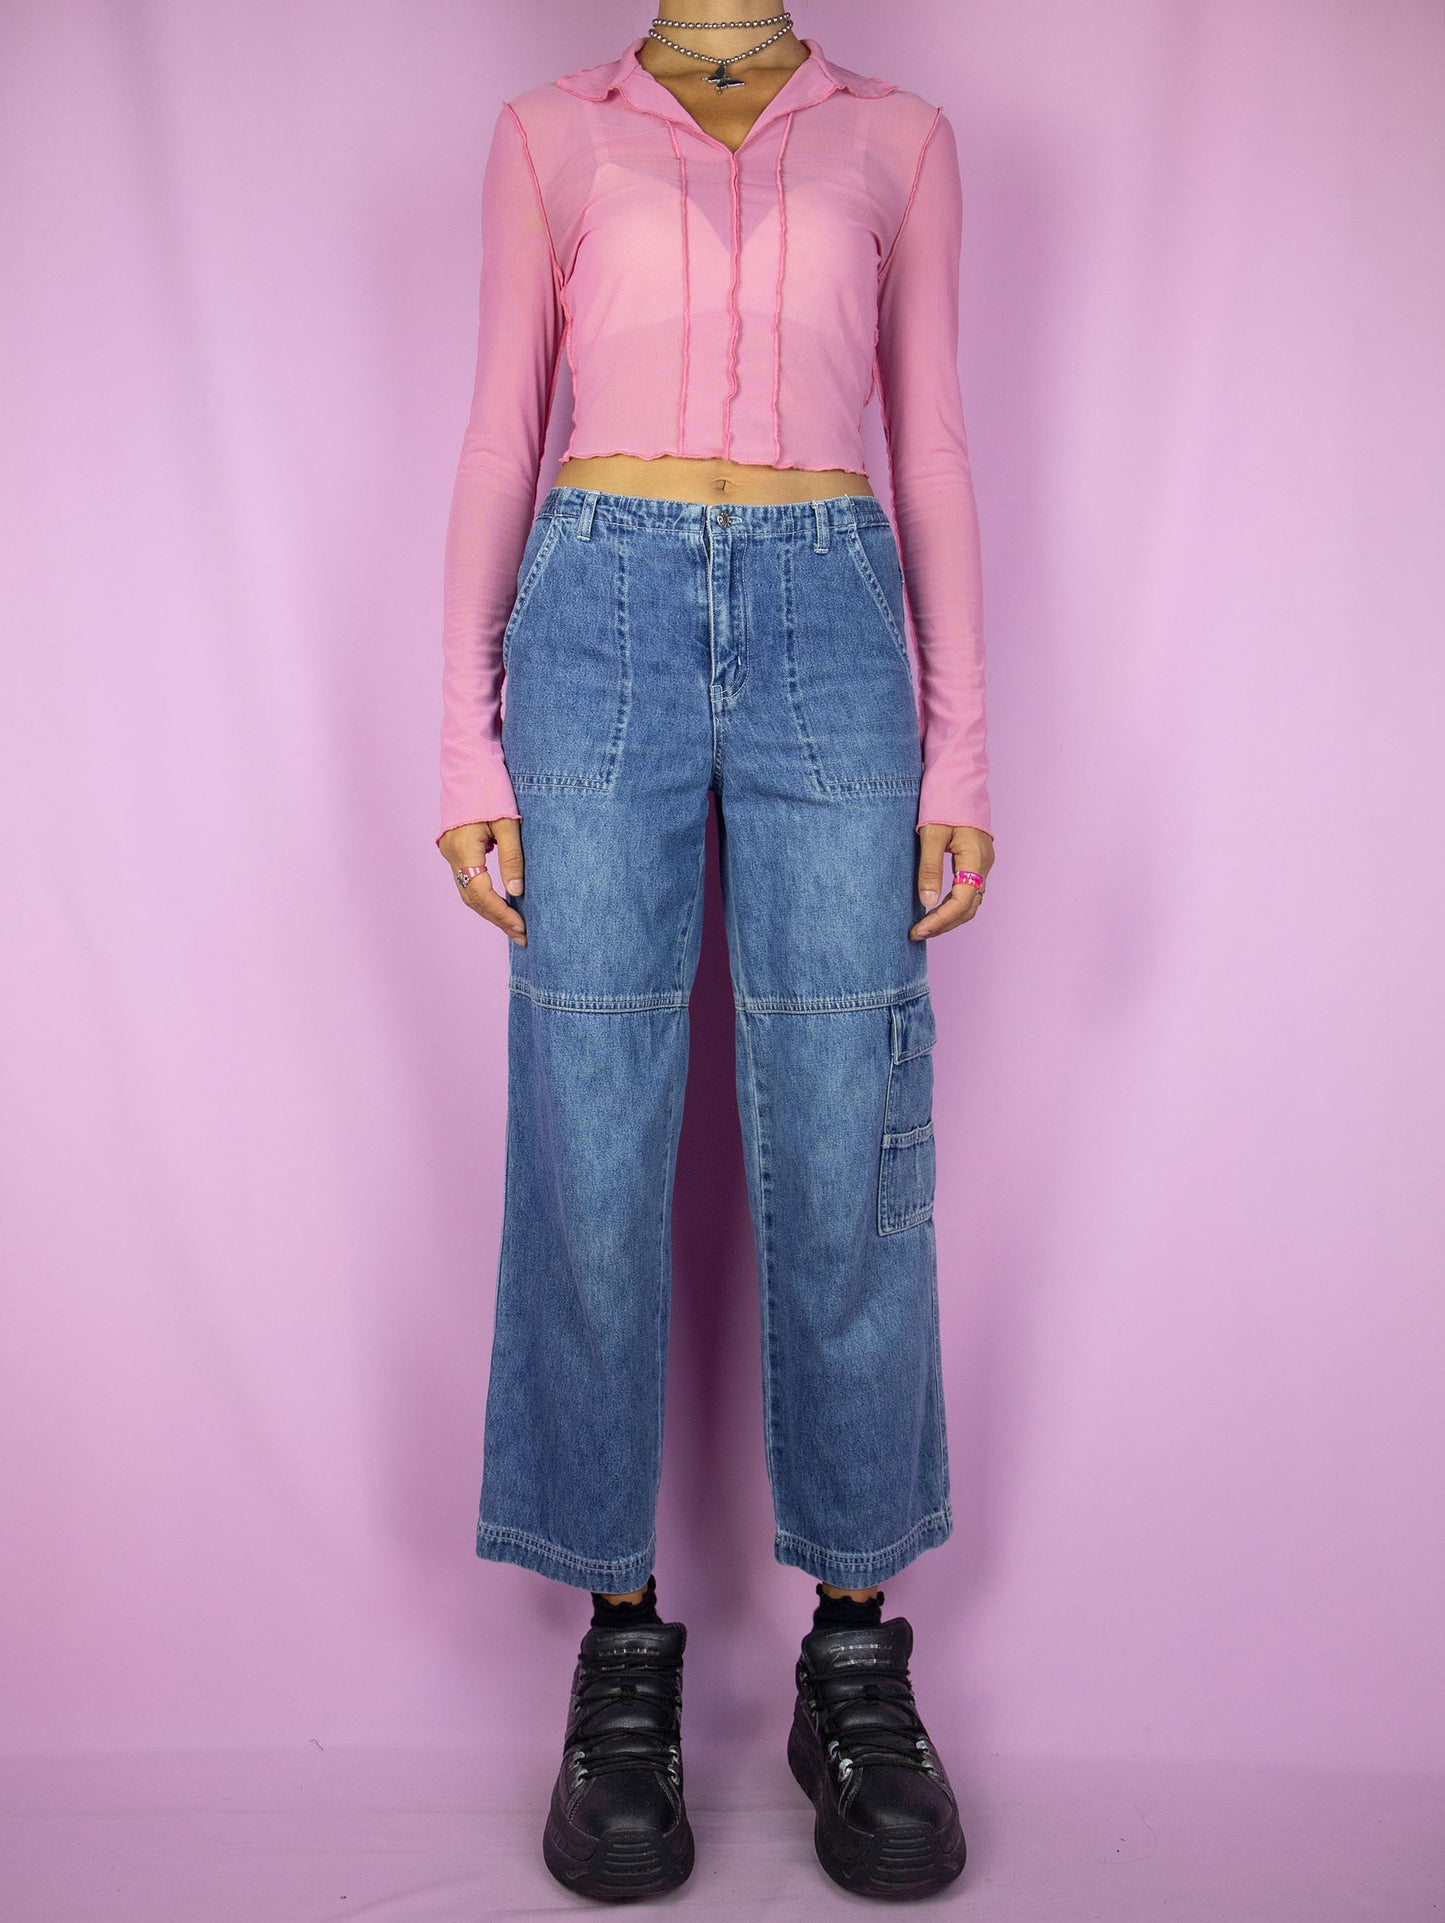 The Y2K Wide Cropped Jeans are vintage 2000s mid-rise cargo ankle denim pants with pockets and zipper closure.